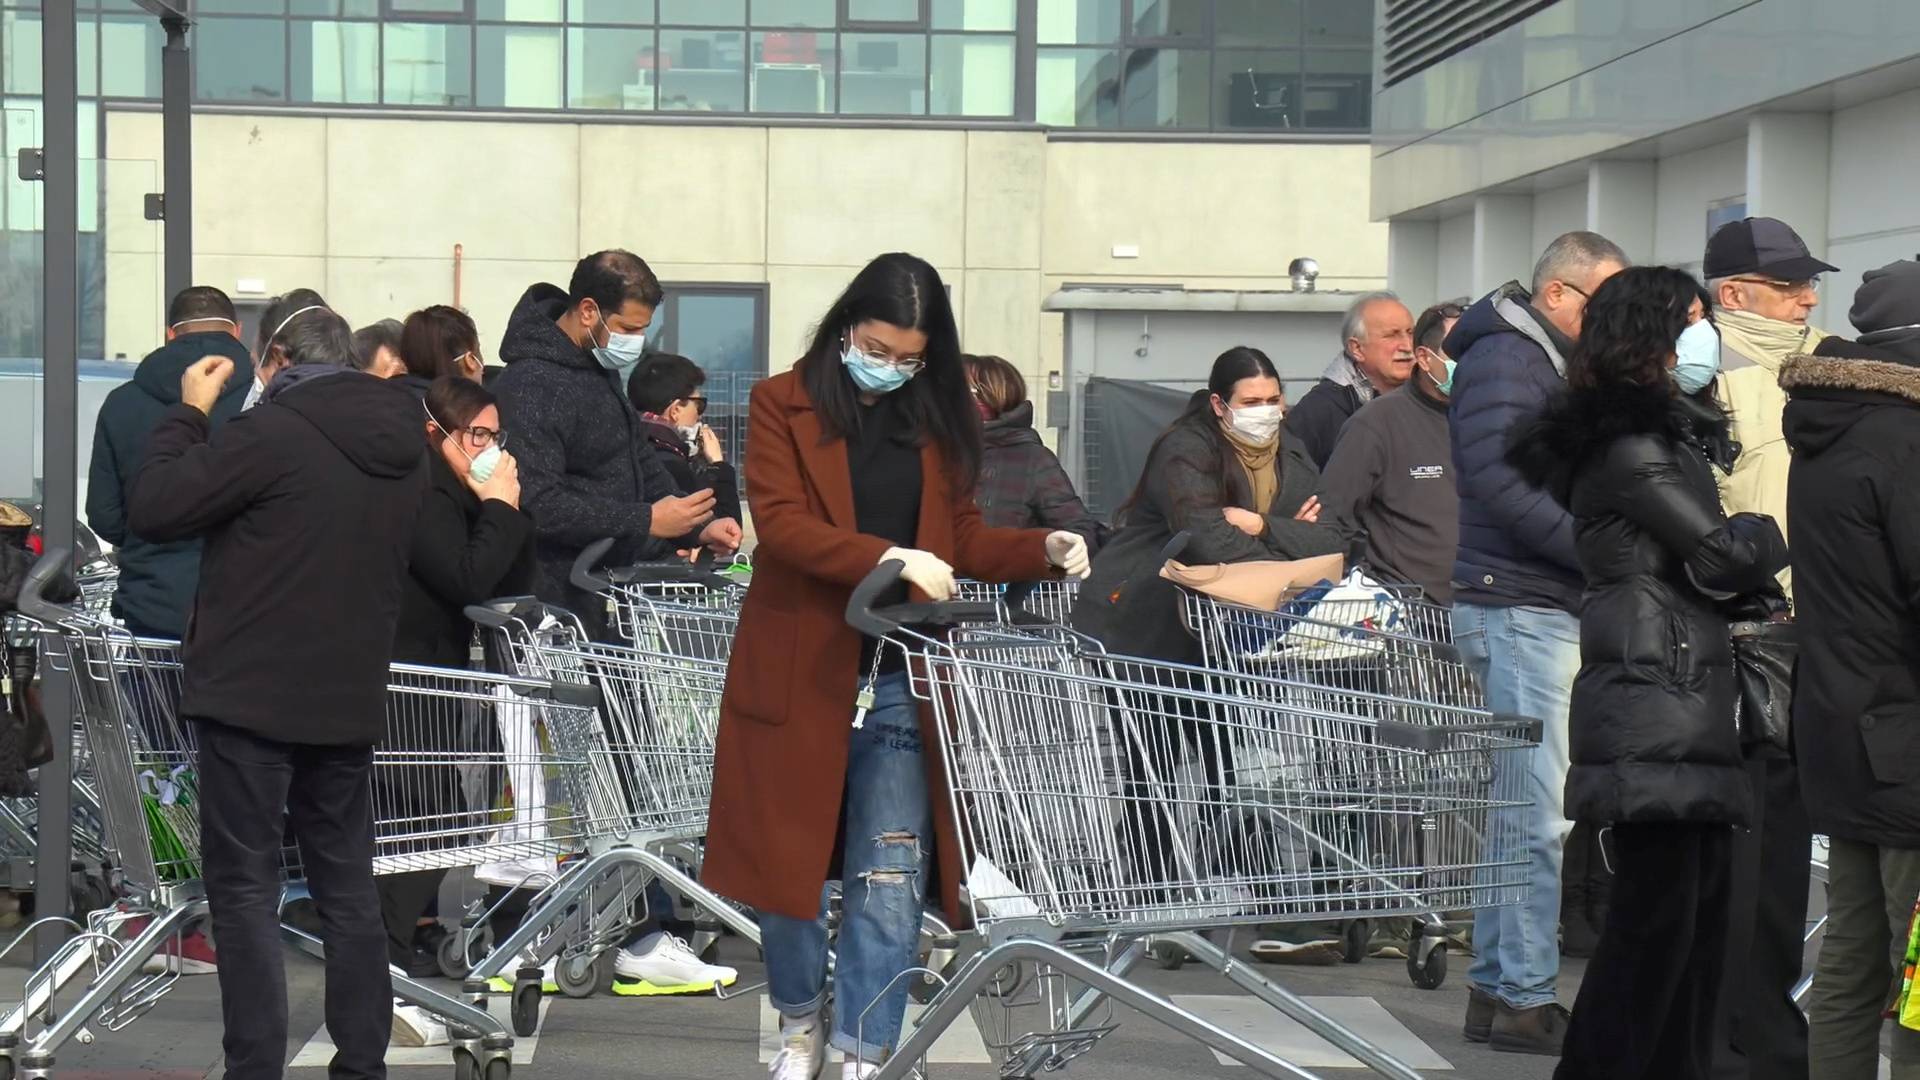 Italians wearing protective masks wait outside a closed supermarket in Casalpusterlengo